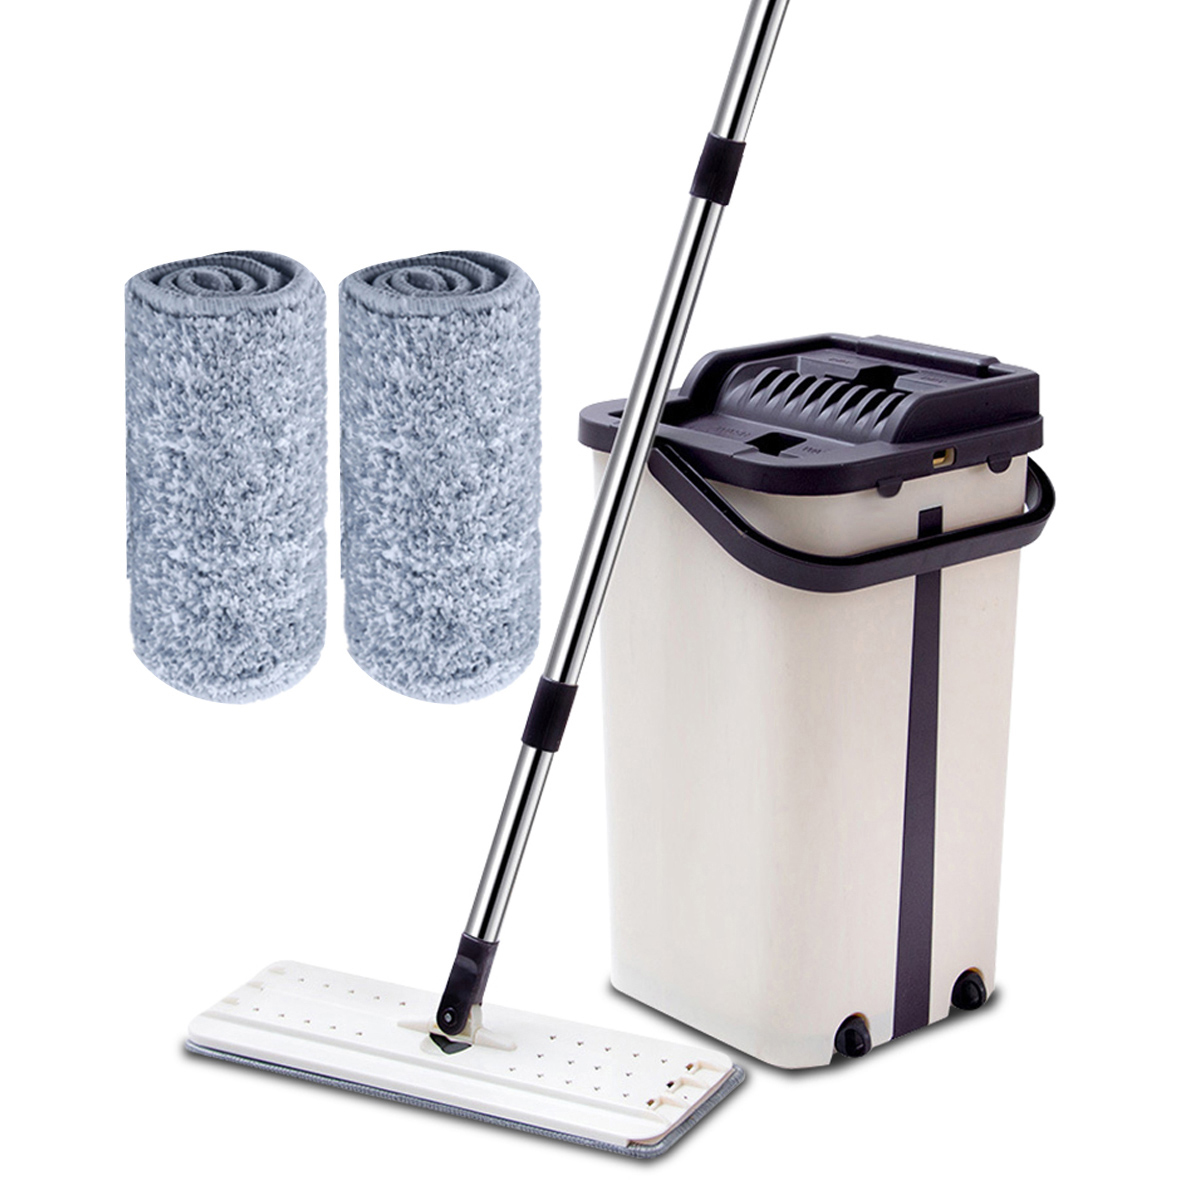 Stainless-Steel-Flat-Squeeze-Mop-With-Bucket-Floor-Dust-Cleaning-Microfiber-Mops-1553978-2